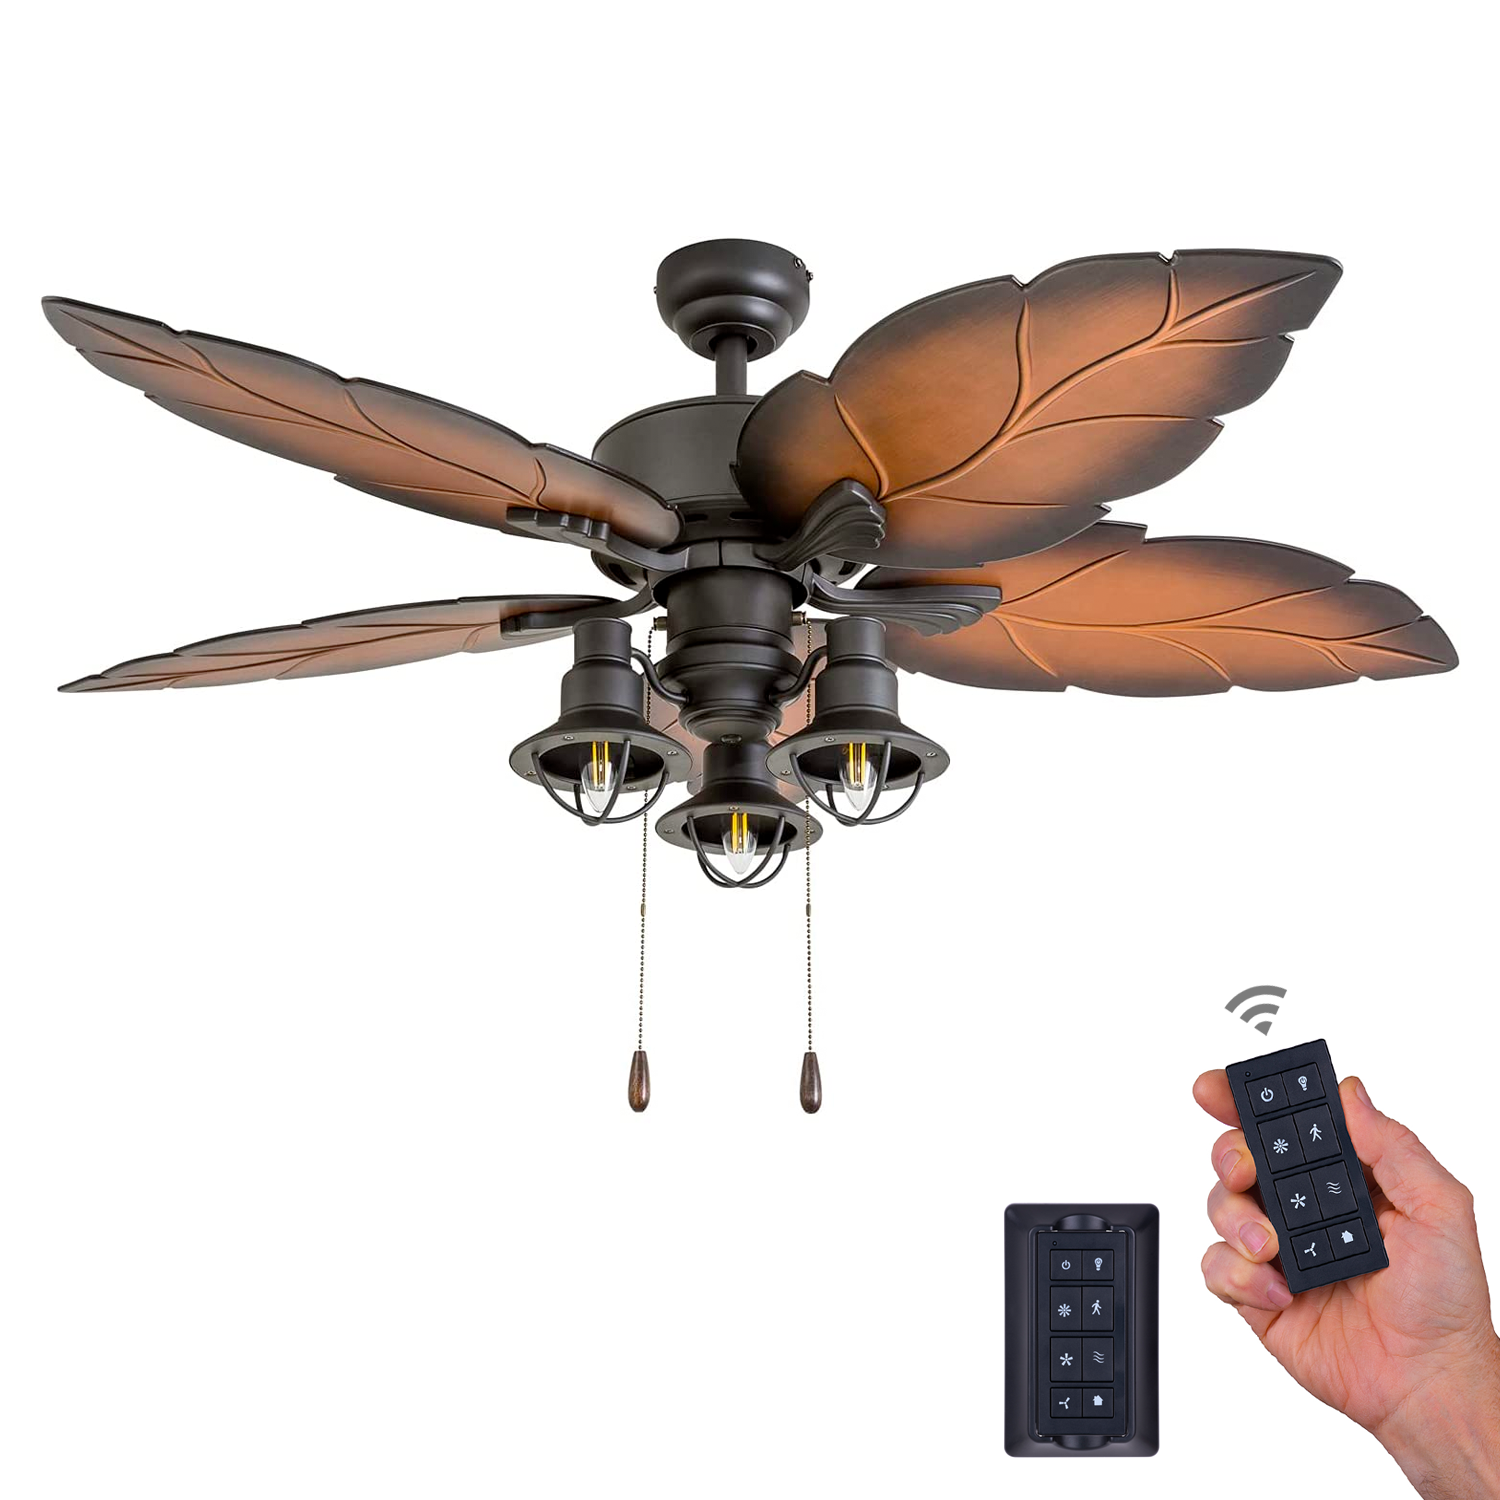 Ceiling Fans 60 inch ceiling fan industrial vintage wooden ventilator with  no light Remete control decorative blower wood retro fans Ceiling Fan  (Blade Color : A with light, Wattage : 52 Inch) - Amazon.com